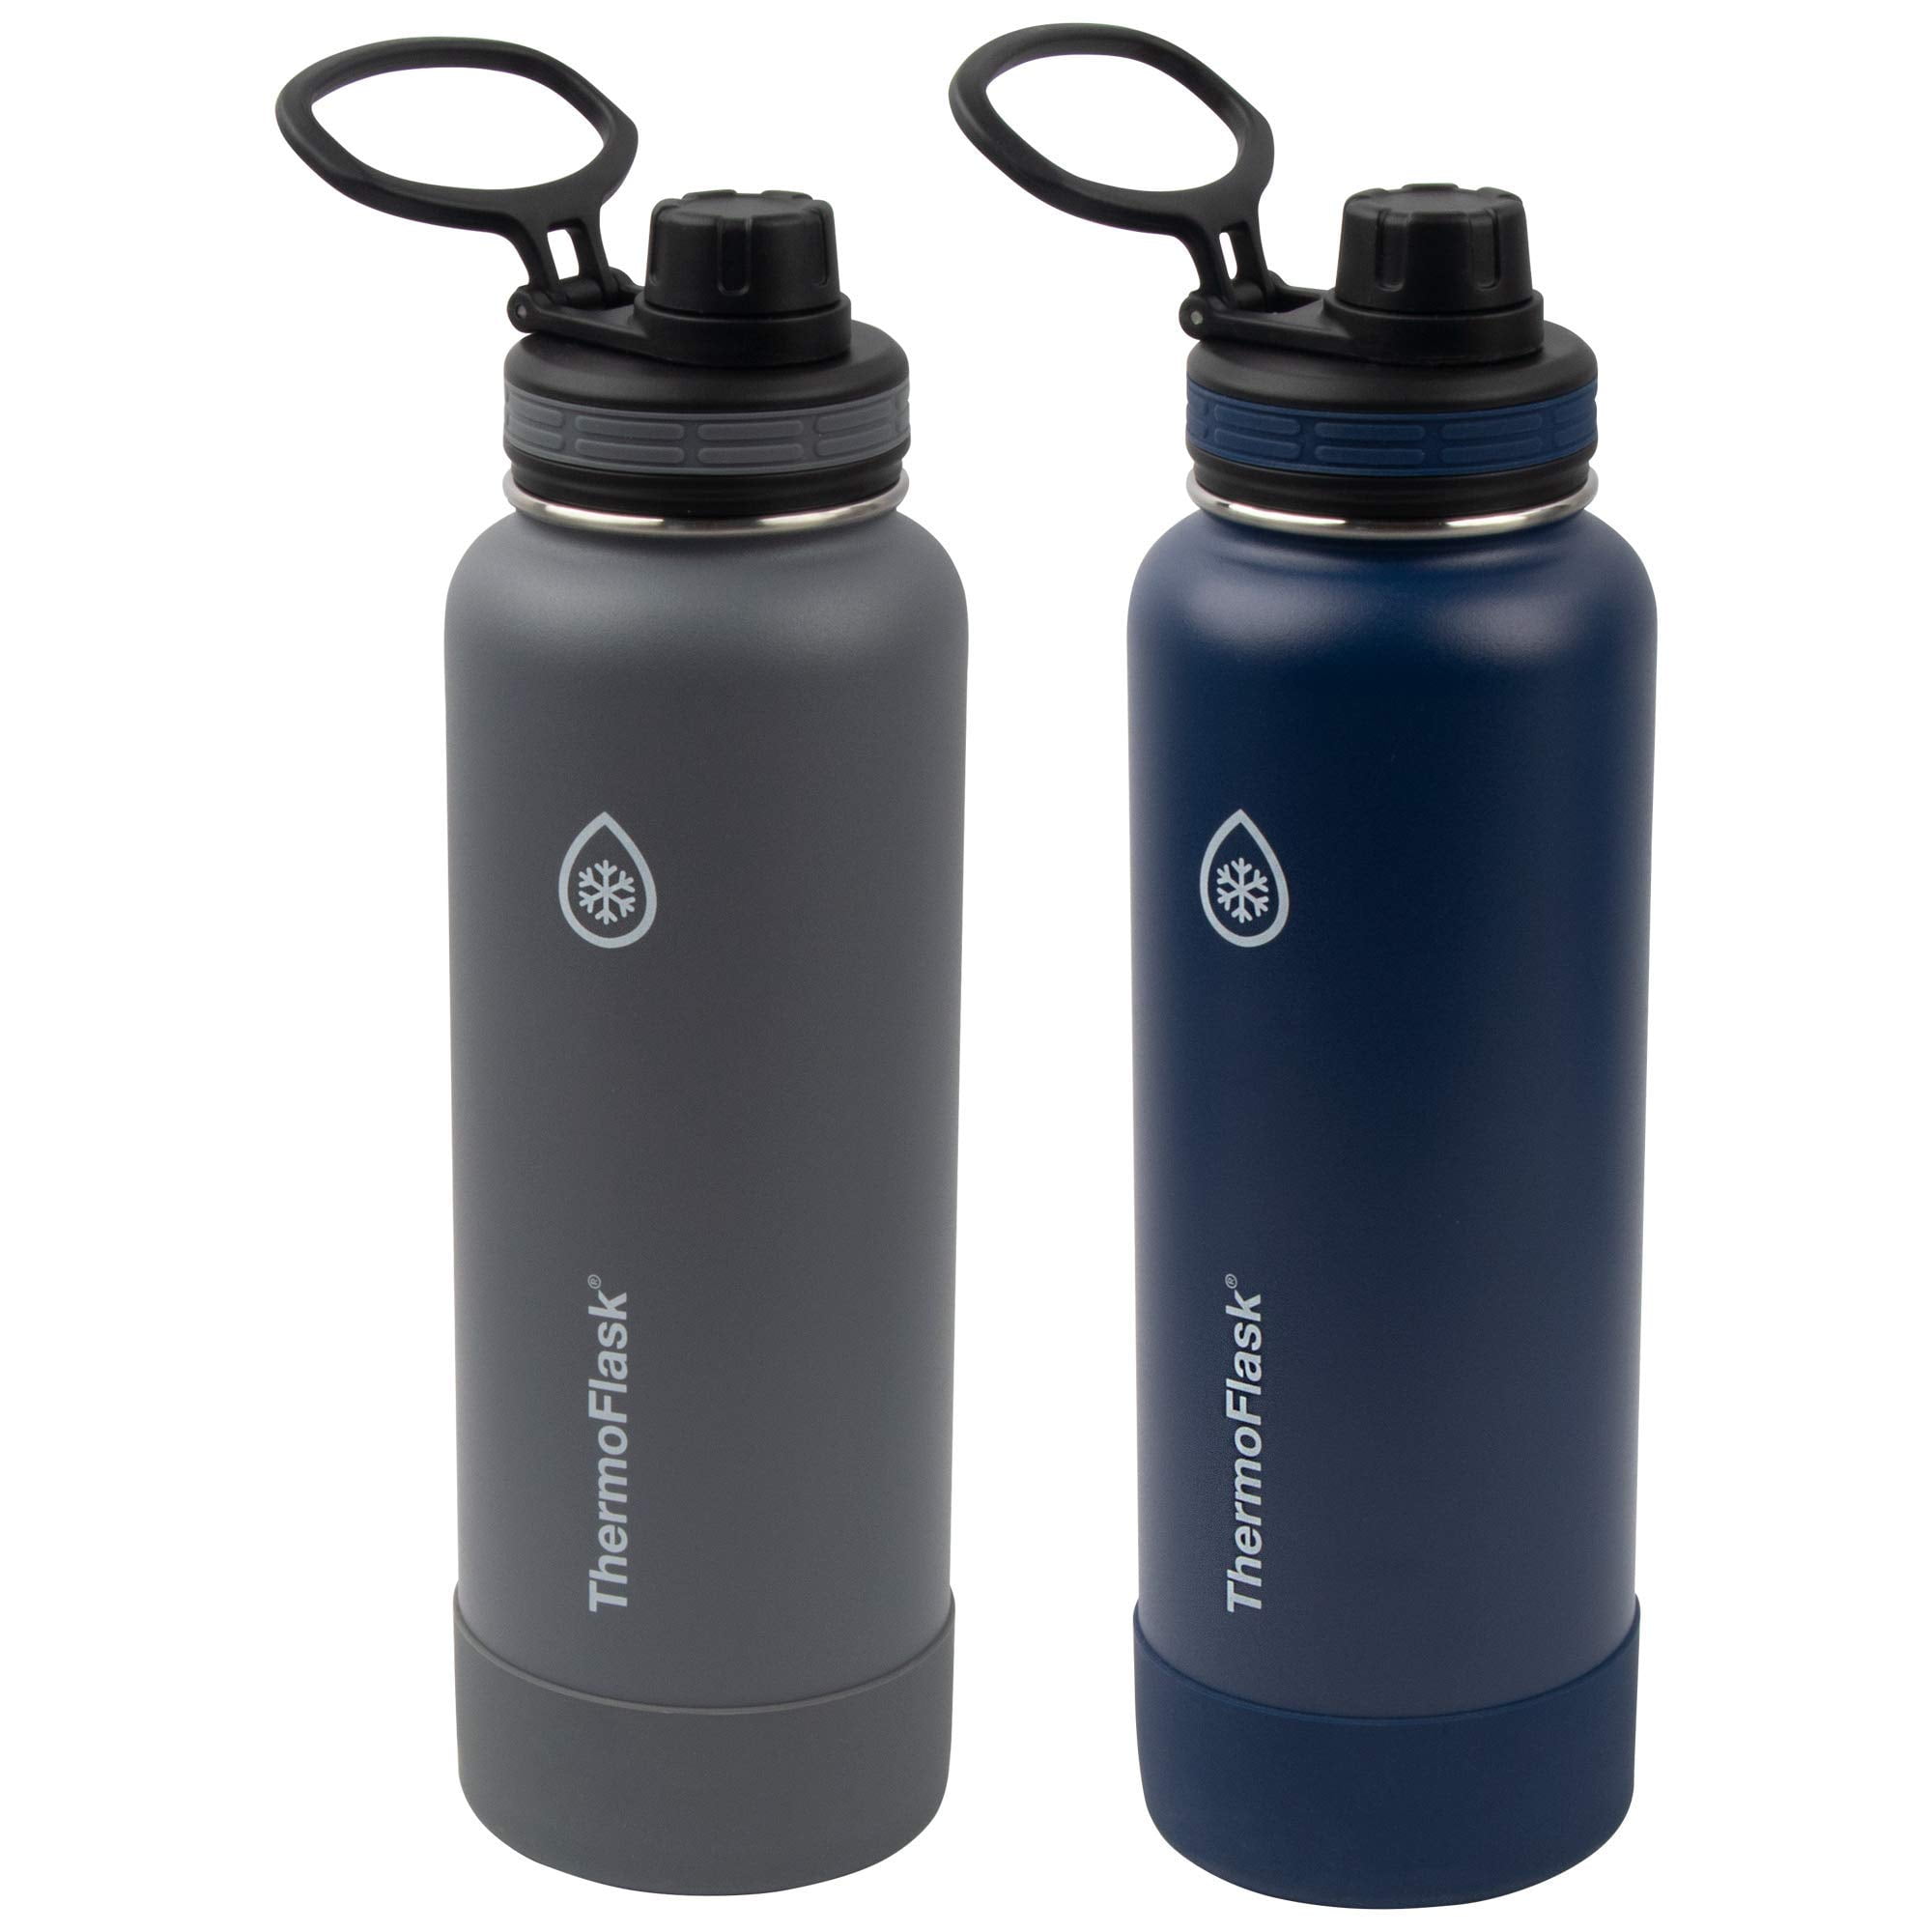 ThermoFlask Insulated Stainless Steel Water Bottle 40 oz/24oz 